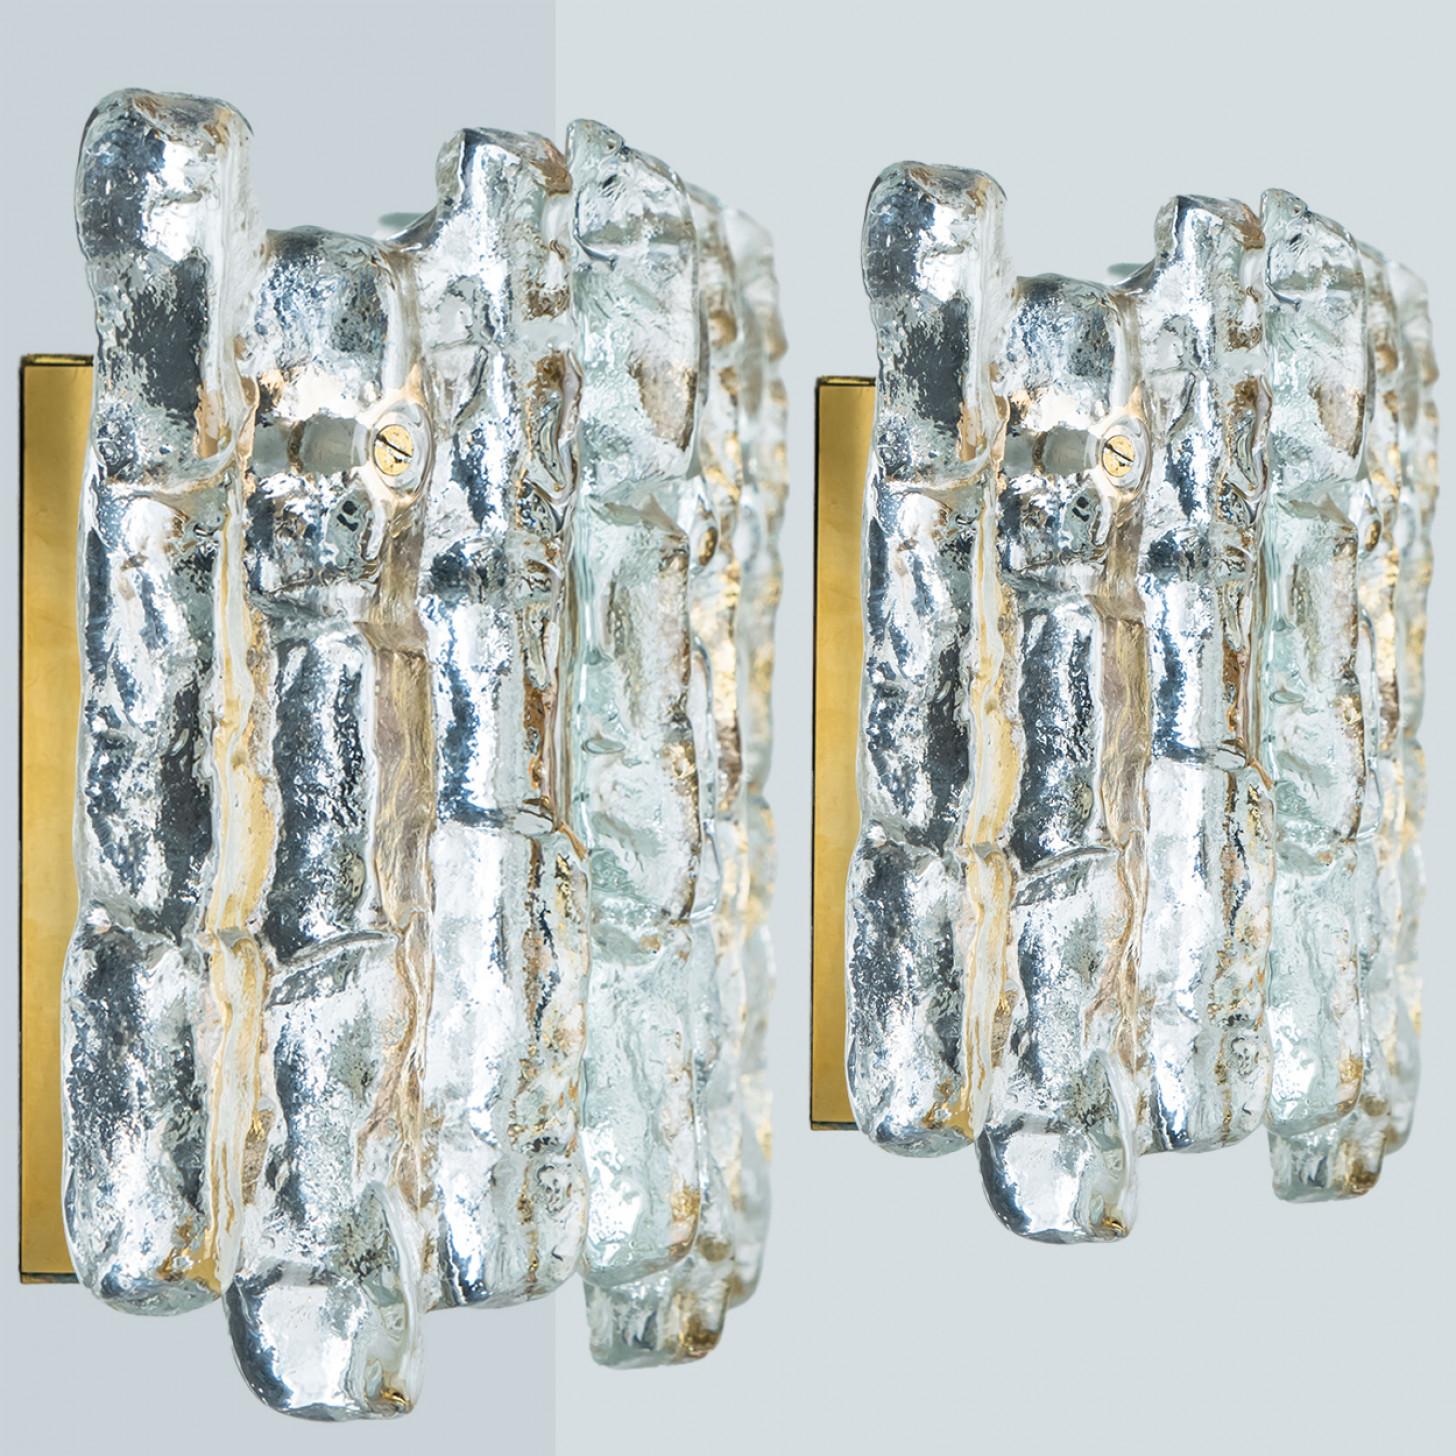 1 of the 3 Pairs of Large Kalmar Wall Sconces by J.T. Kalmar, Austria, 1970s For Sale 7